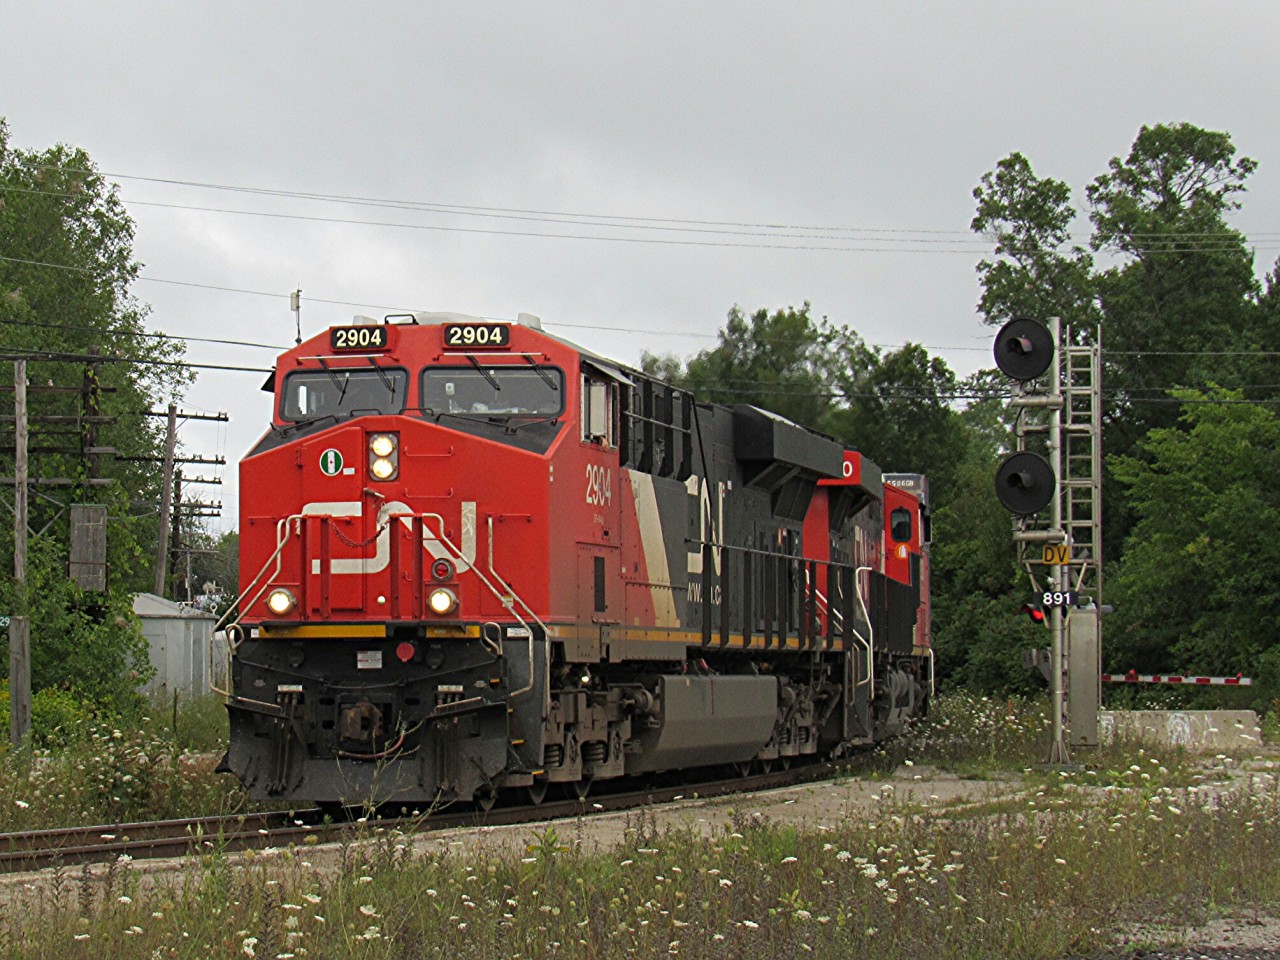 Canadian National mixed freight train, M314, rounds the corner at Washago, Ontario, lead by a pair of ES44AC's. 314 had a decent sized train, coming in at 584 axels on the Milepost 87.0 hotbox detector outside of Washago. He would be nearing his destination of CN Macmillan Yard in approximately 88 miles.